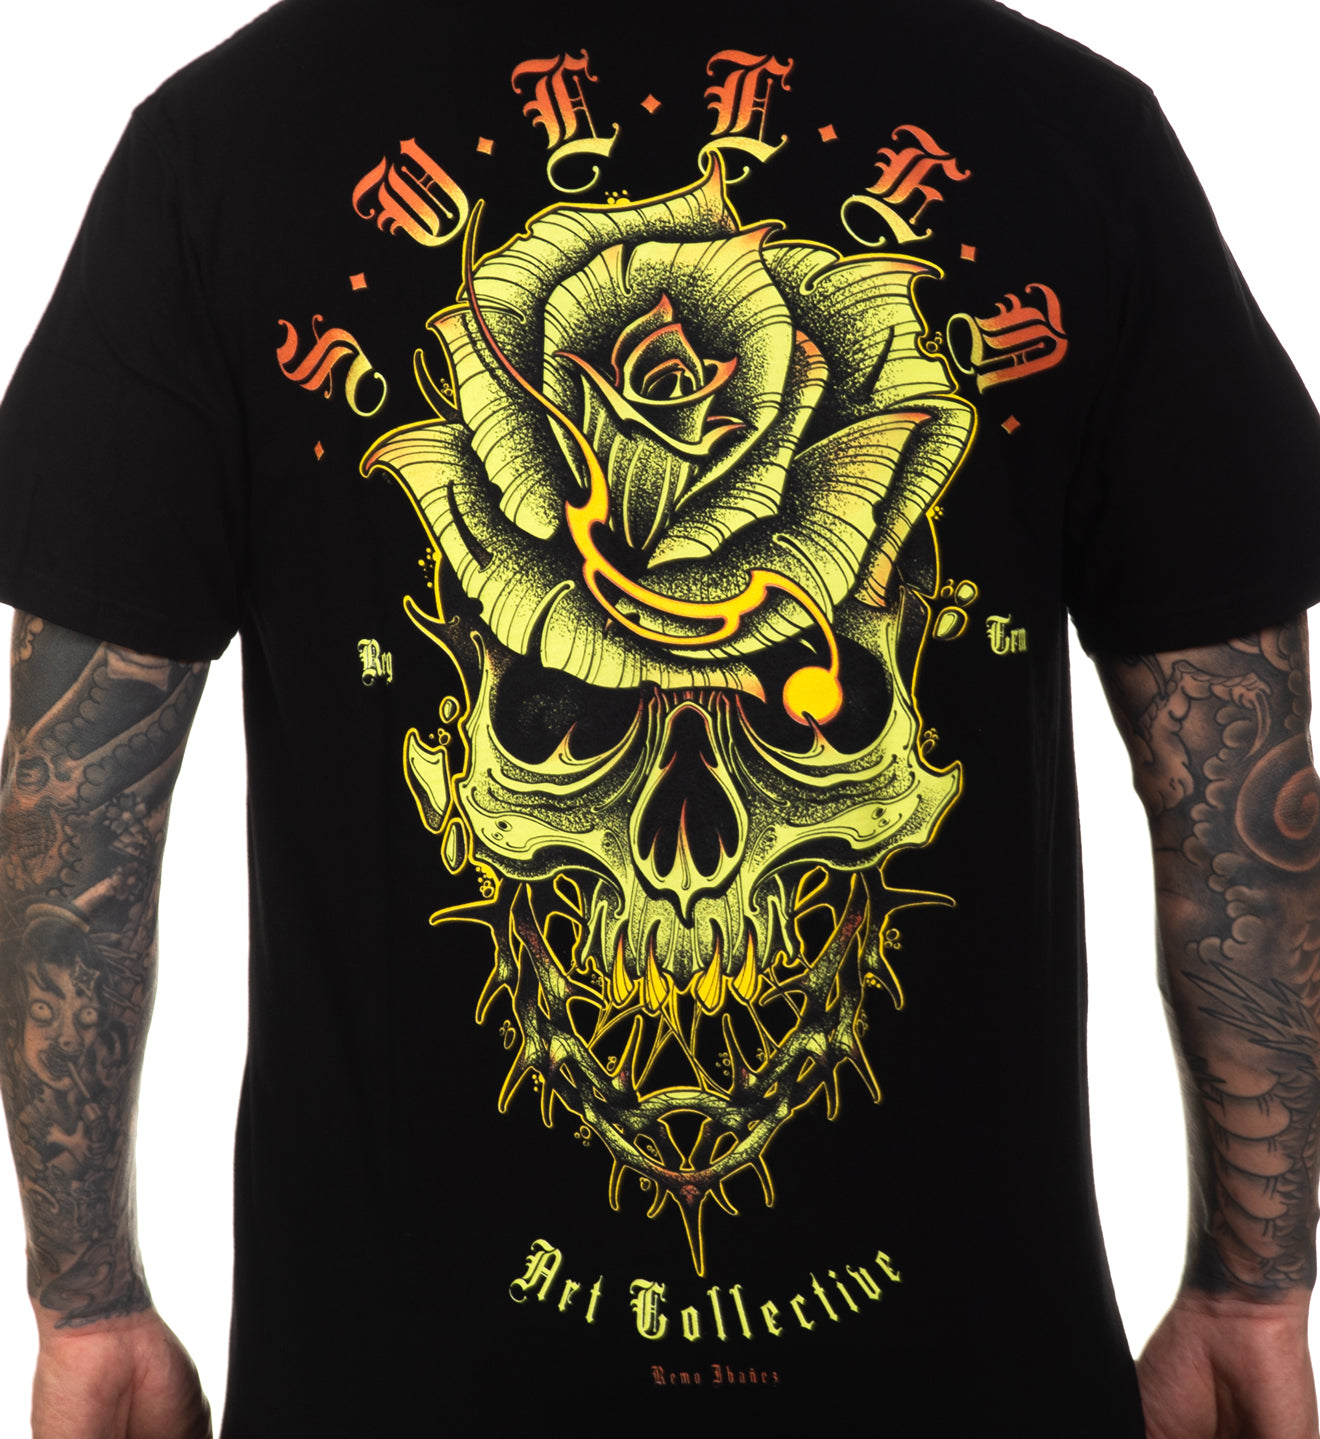 Sullen Art Collective - Tattoo Lifestyle Apparel & Clothing Brand